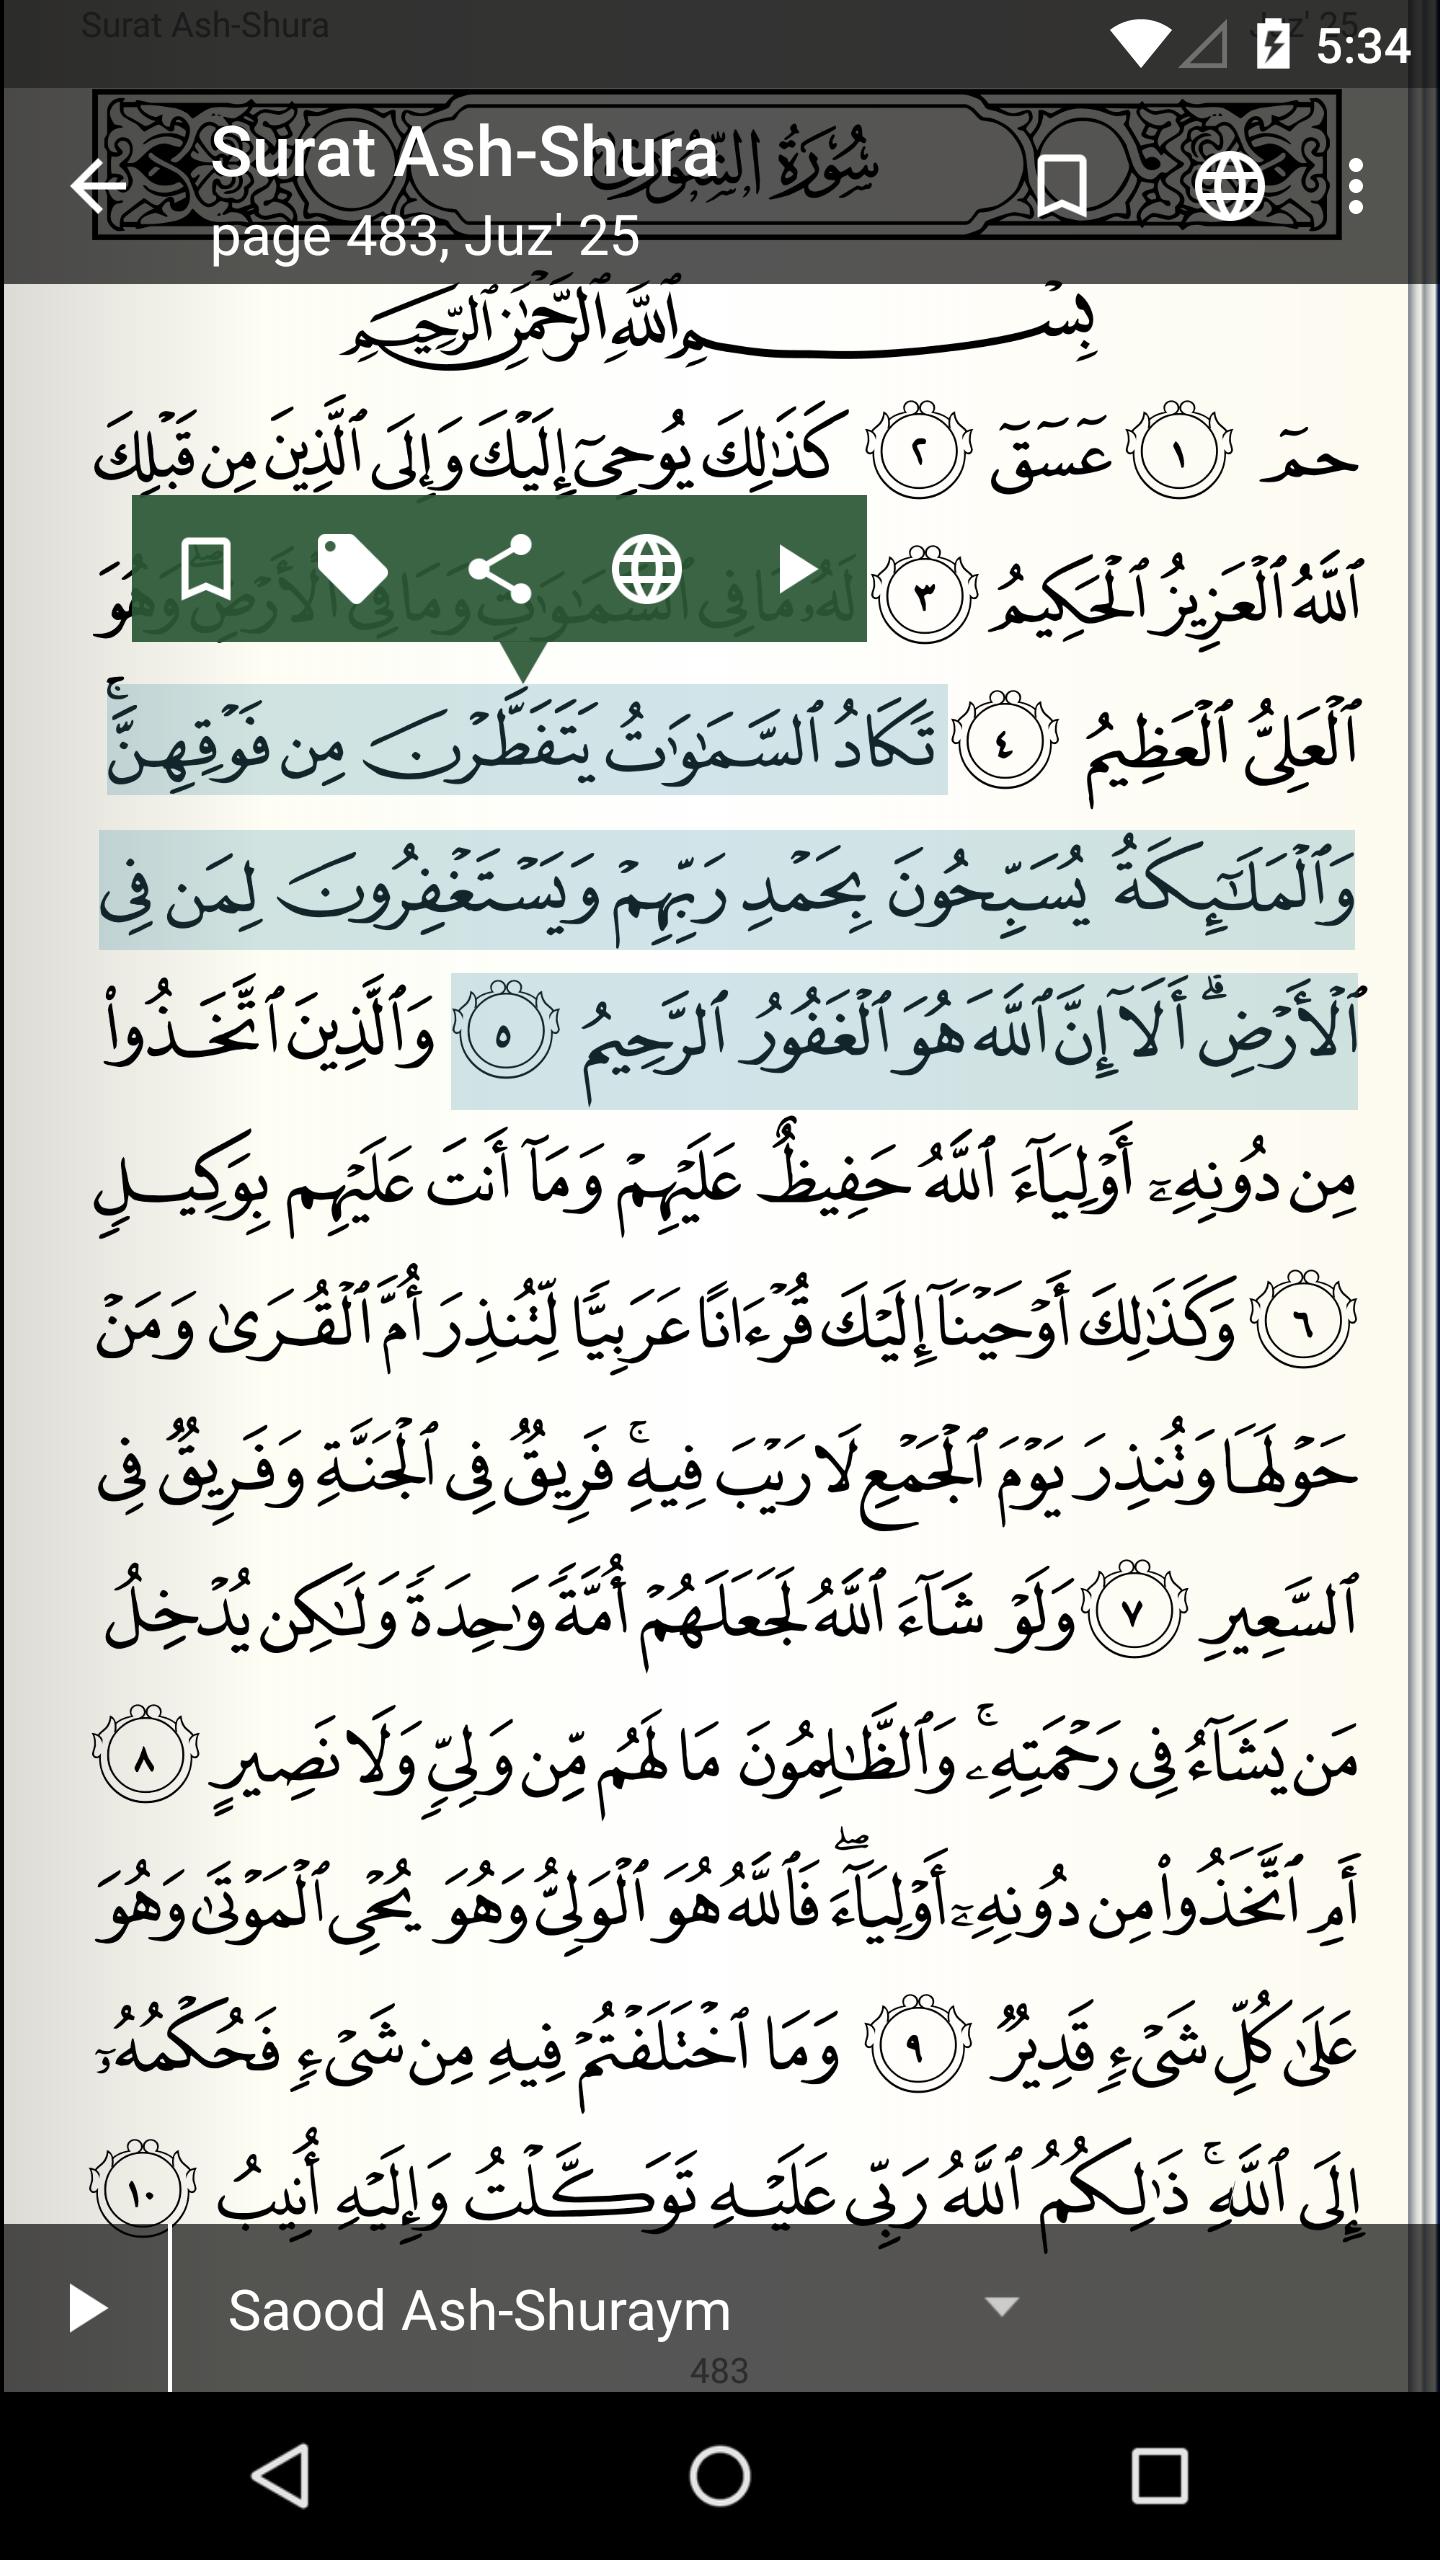 Quran for Android 3.0.2 Screenshot 4